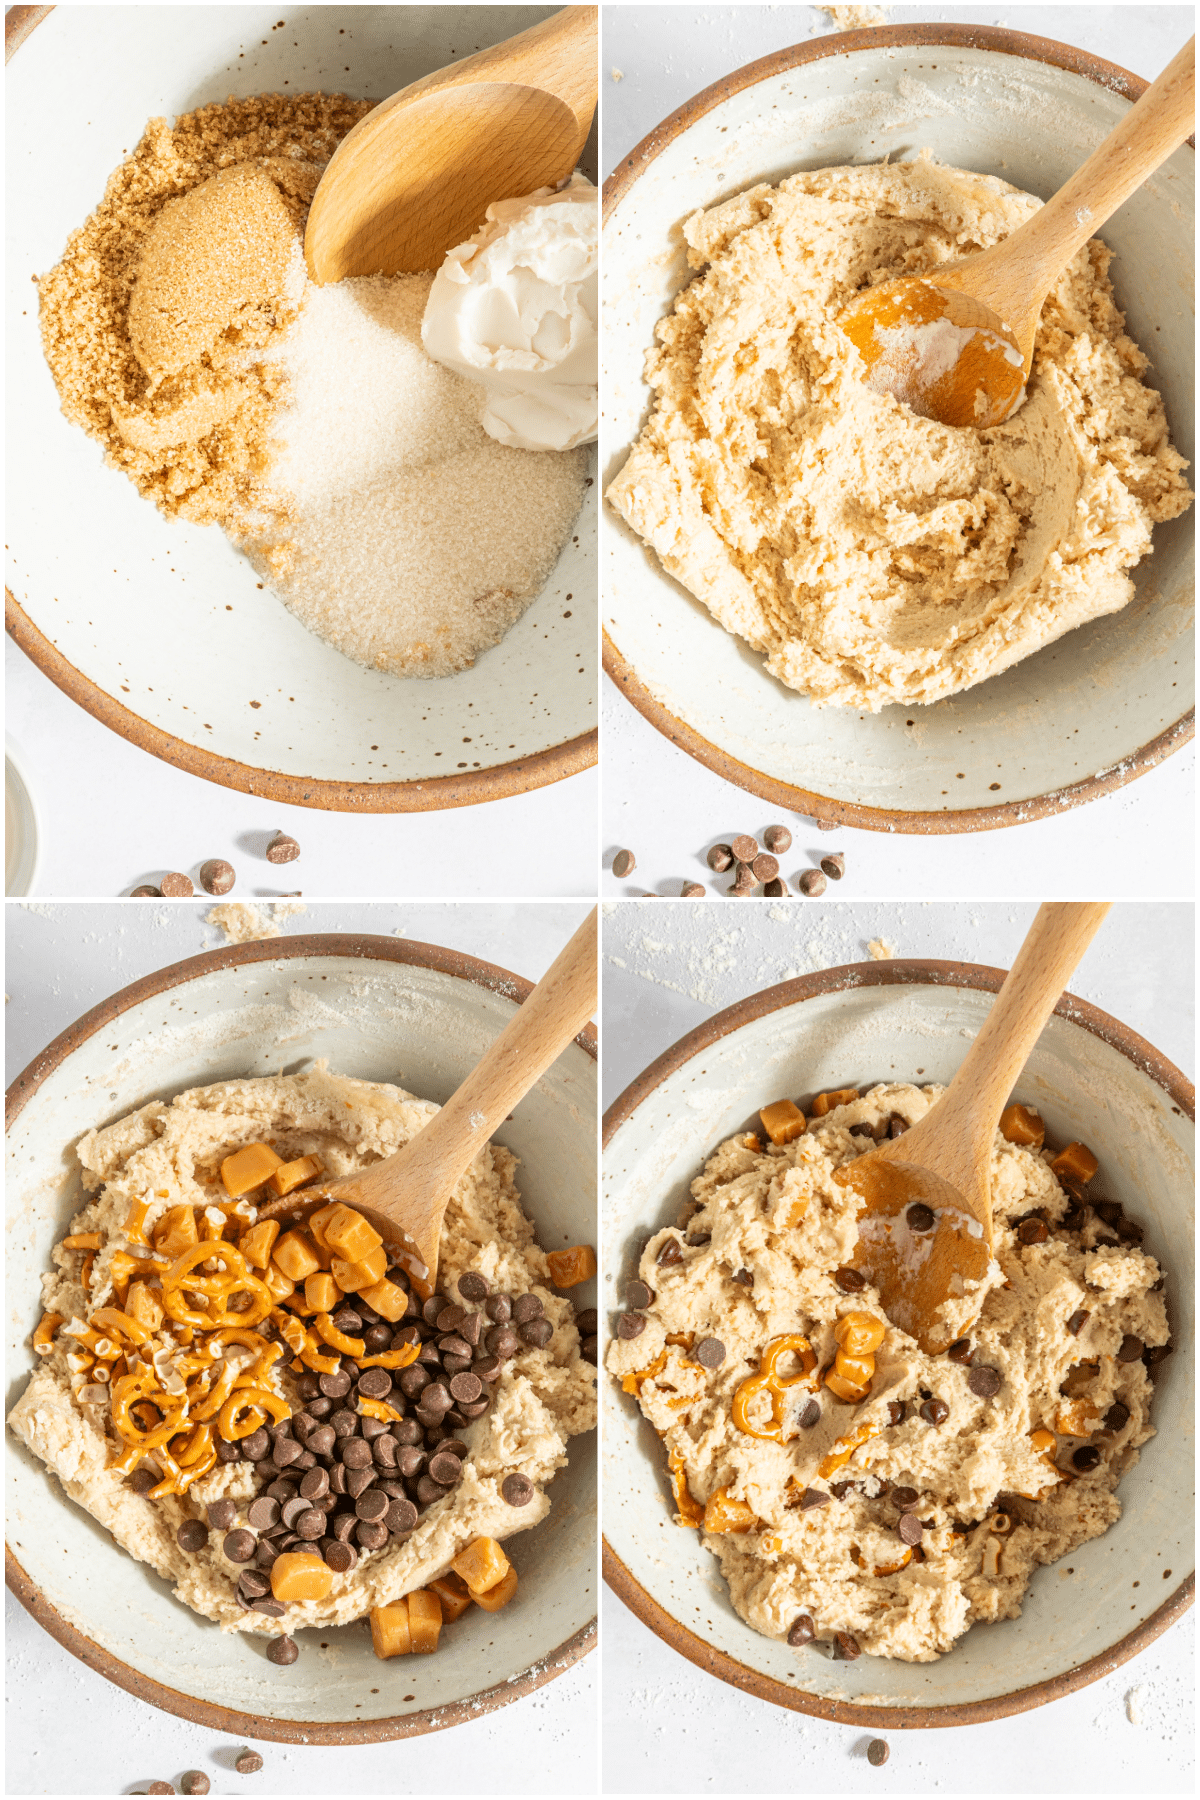 Four photos showing how to make a skillet cookie: cream together butter and sugars, stir in flours, add pretzels, caramels, and chocolate chips, stir to combine.